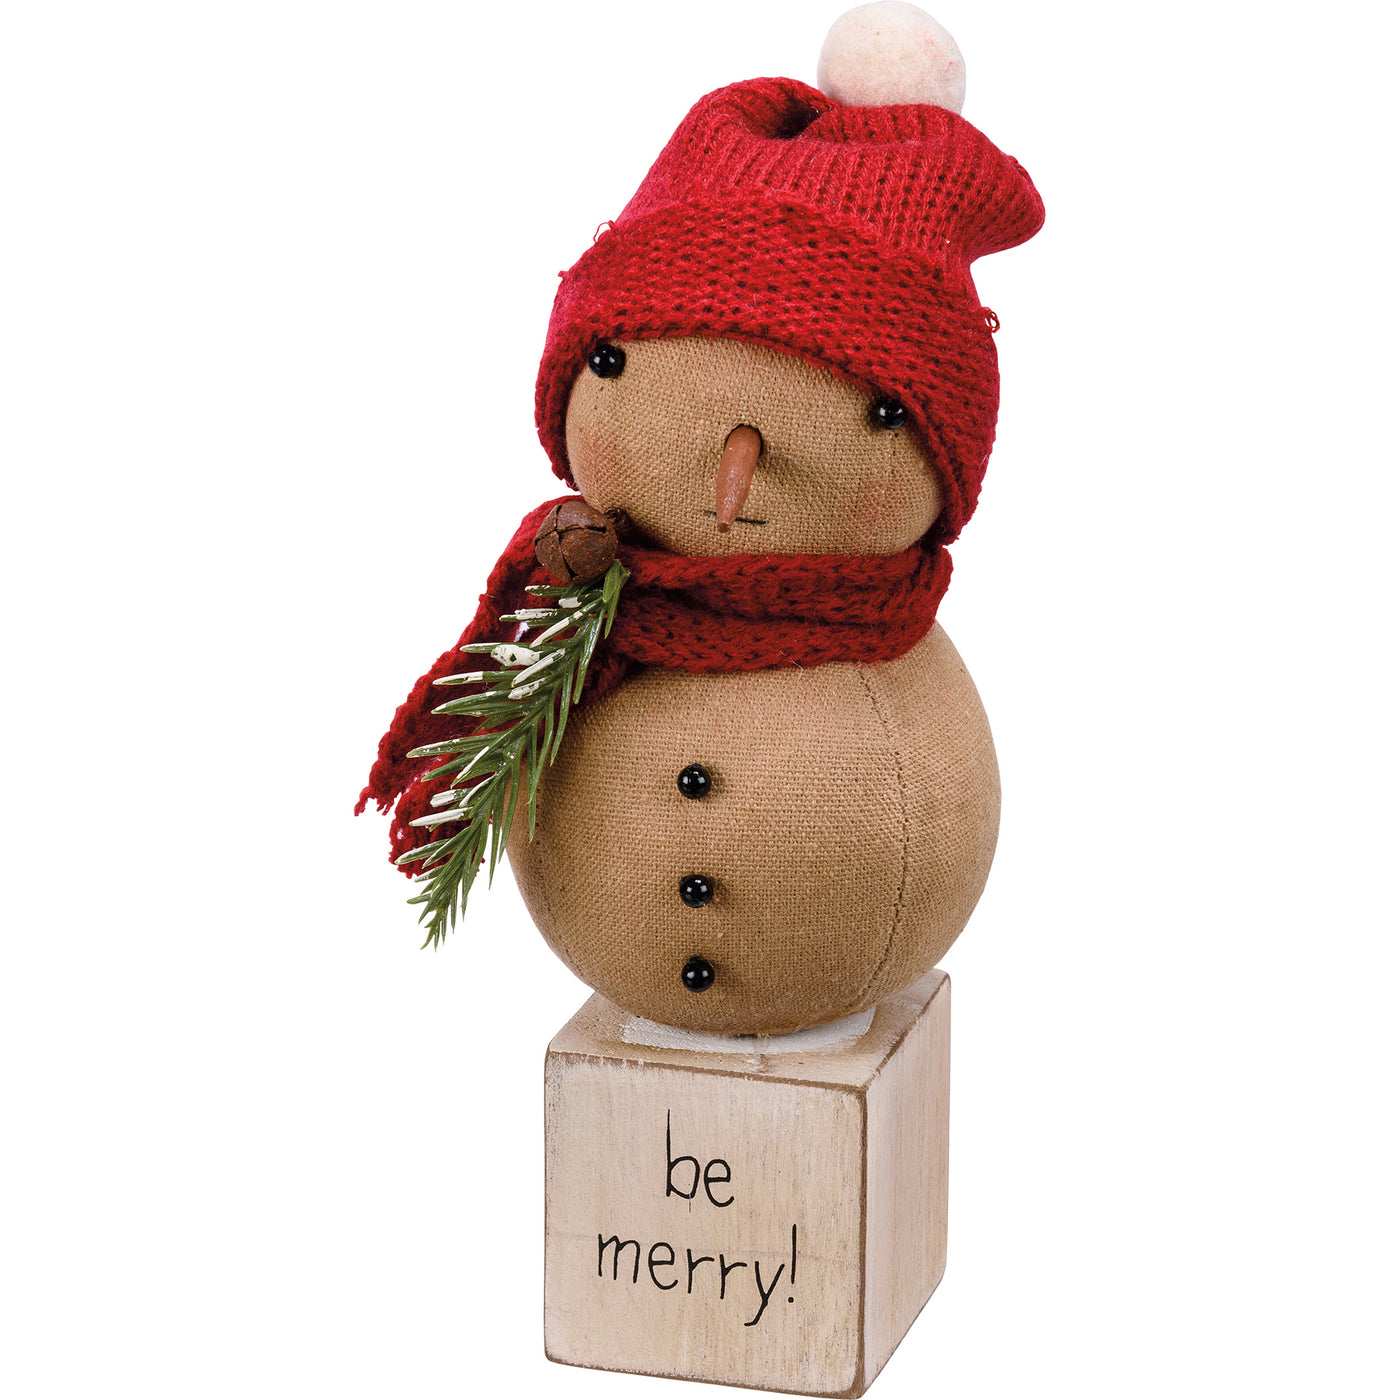 Rustic Plush Snowman Sitter On Be Merry Wooden Block